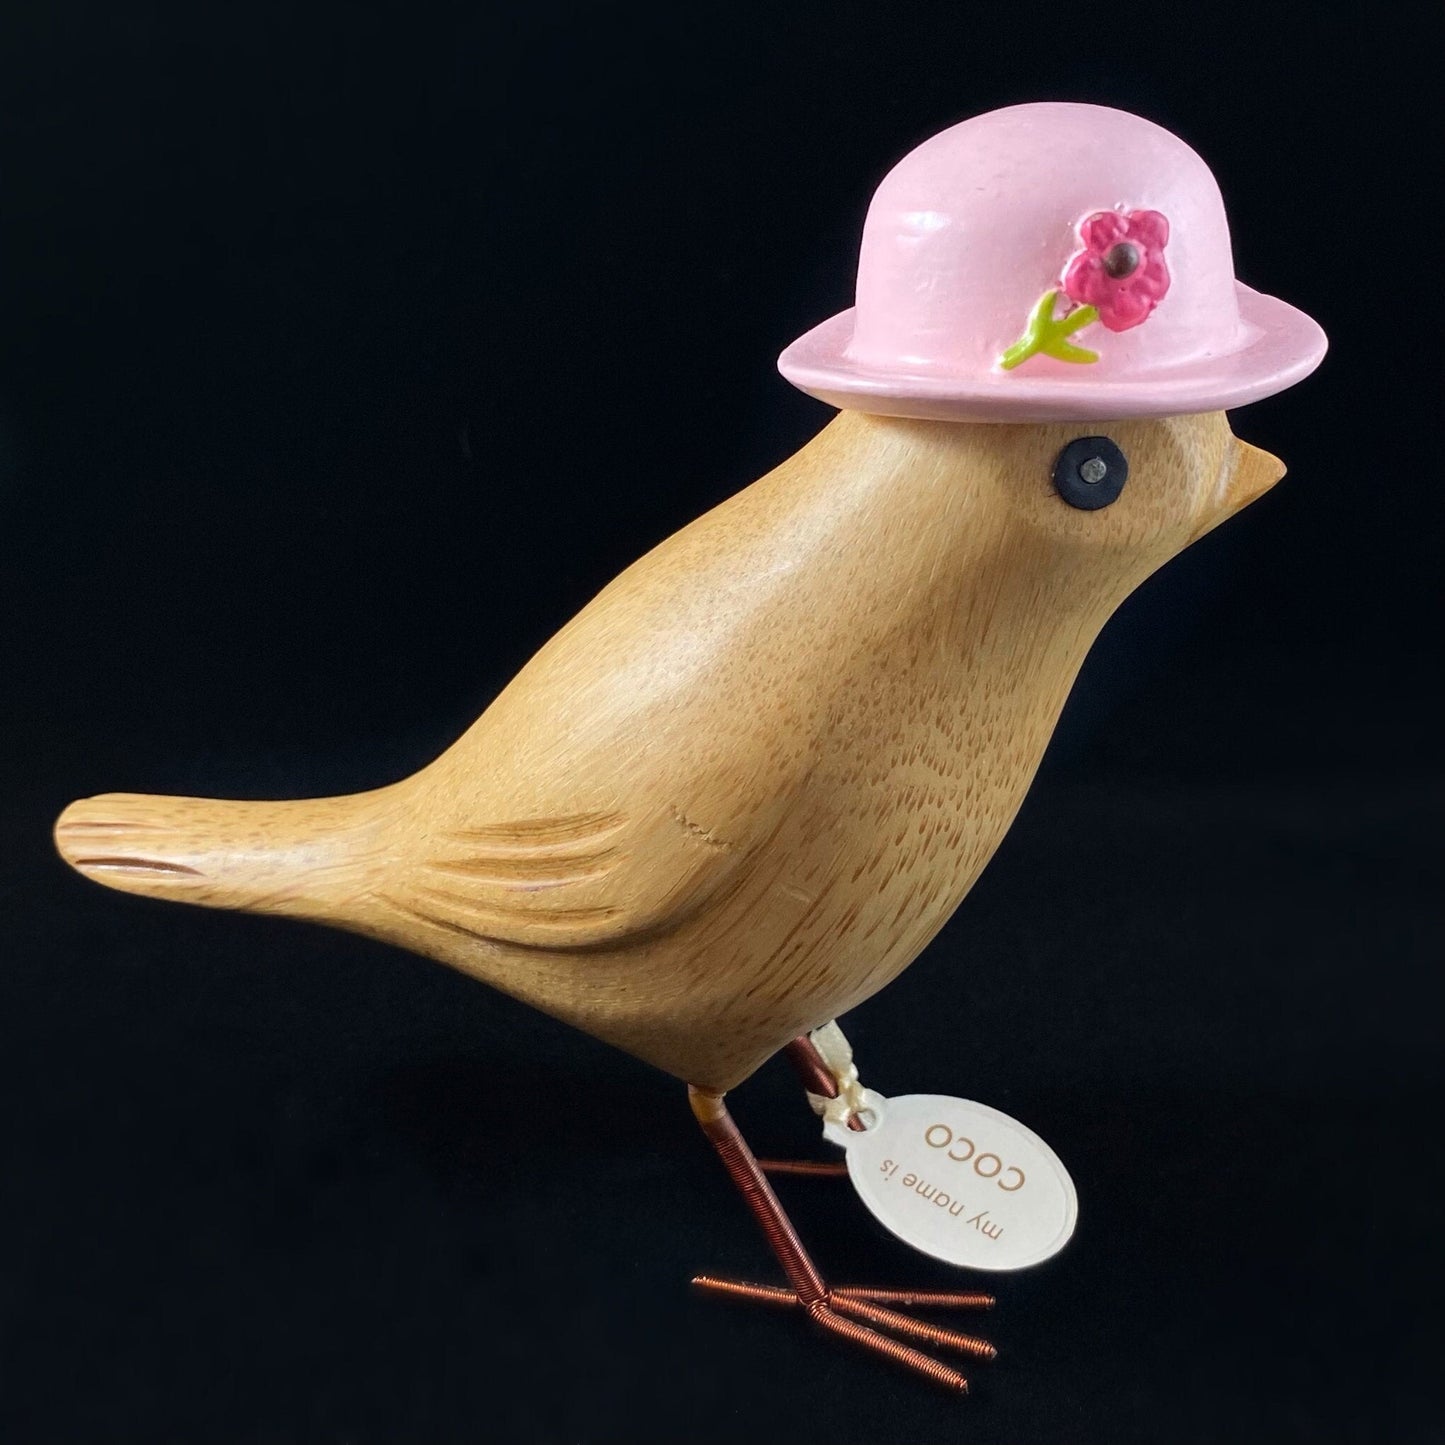 Coco - Hand-carved Wooden Bird with Hand-painted Hat, Bamboo